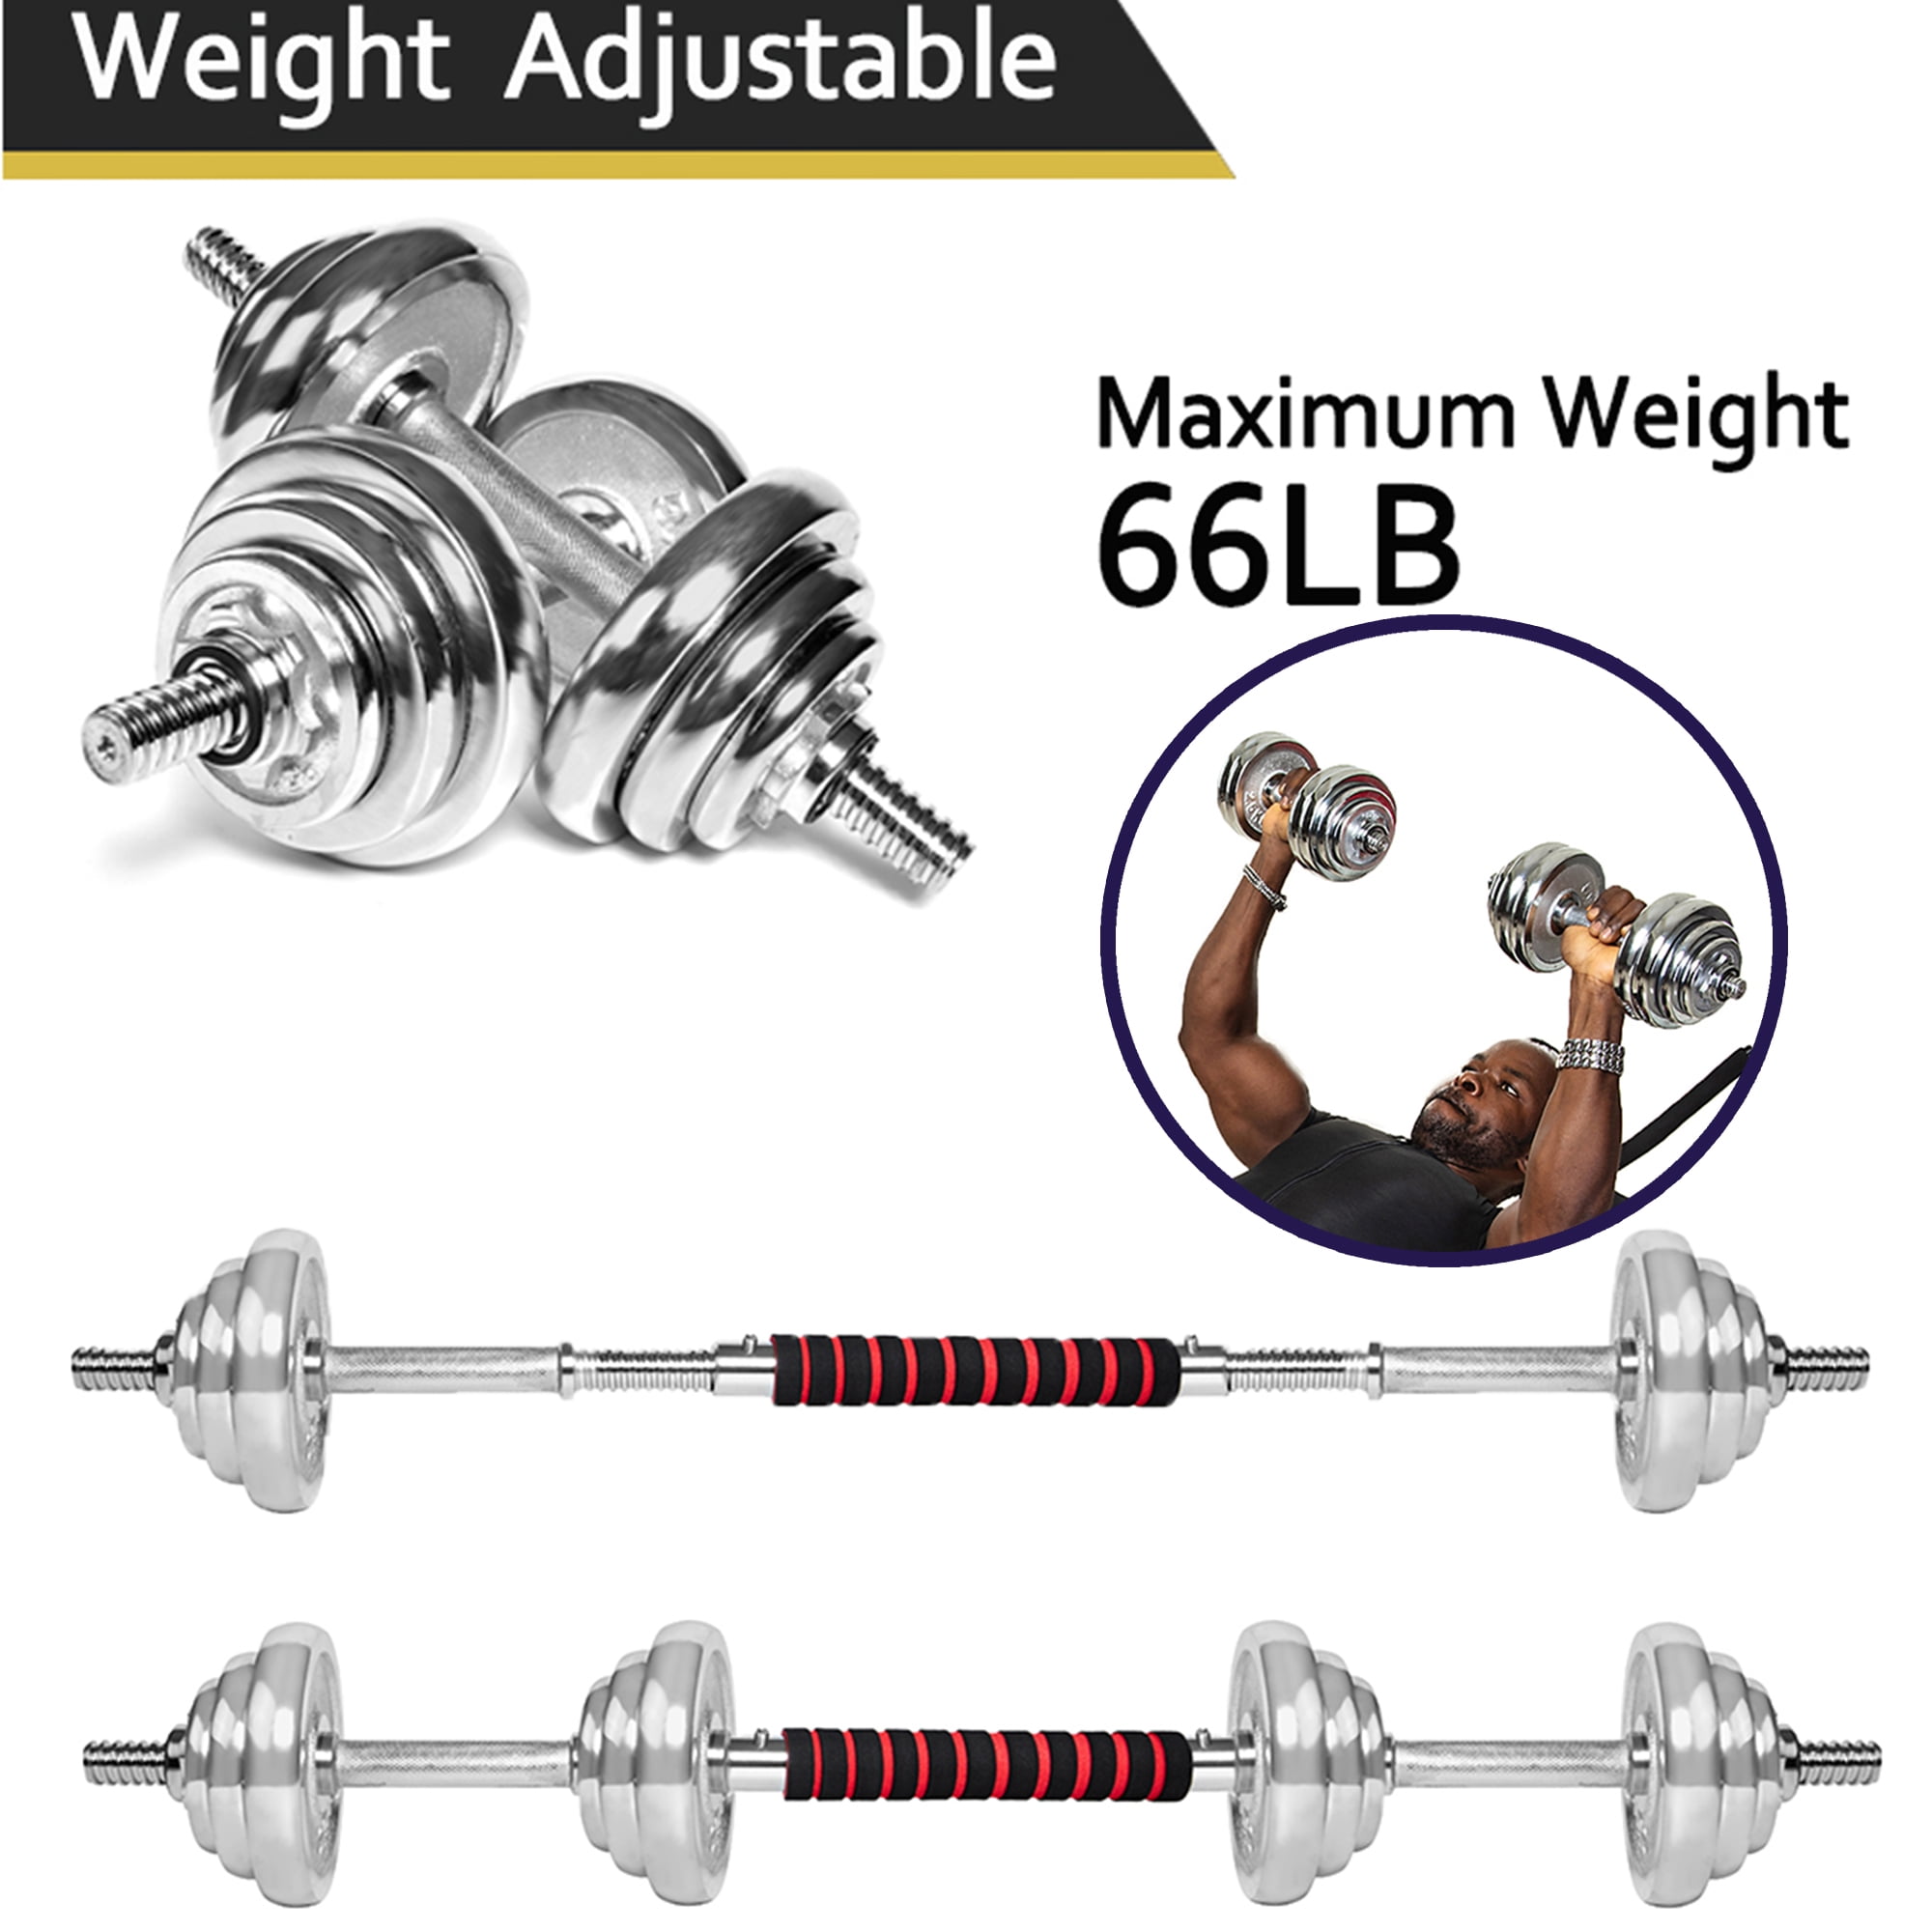 Barbell adjustable dumbbell Axle bar vertical wall mount various colours 